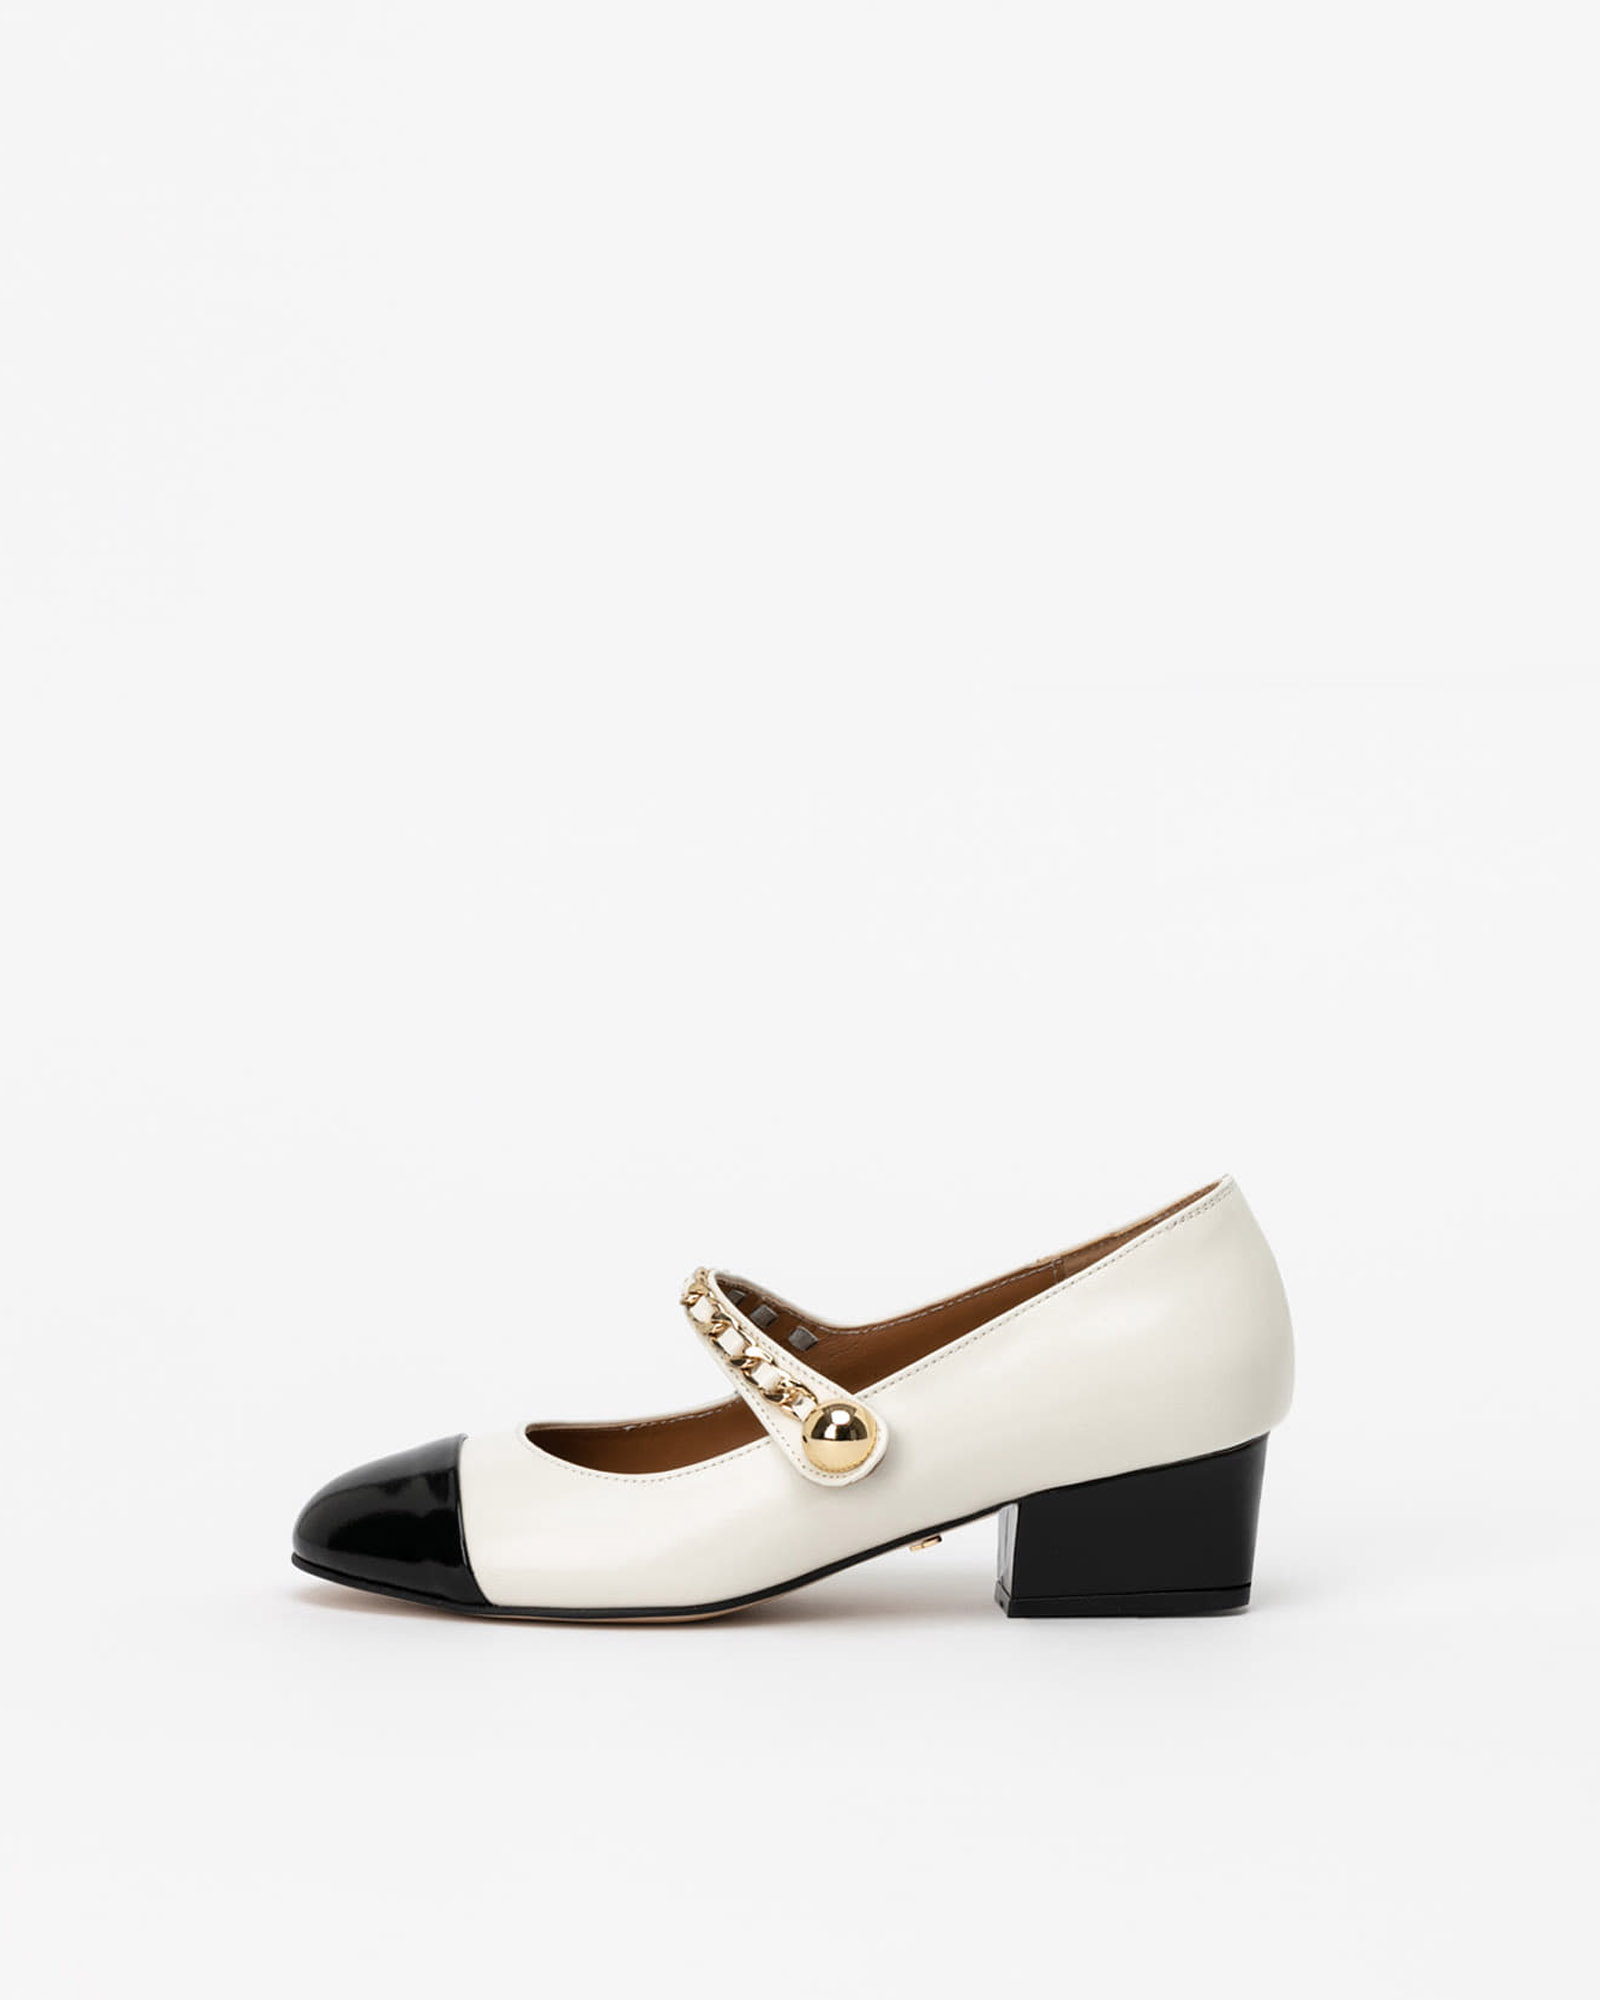 Aria Chained Maryjane Pumps Low in Textured Ivory with Textured Black